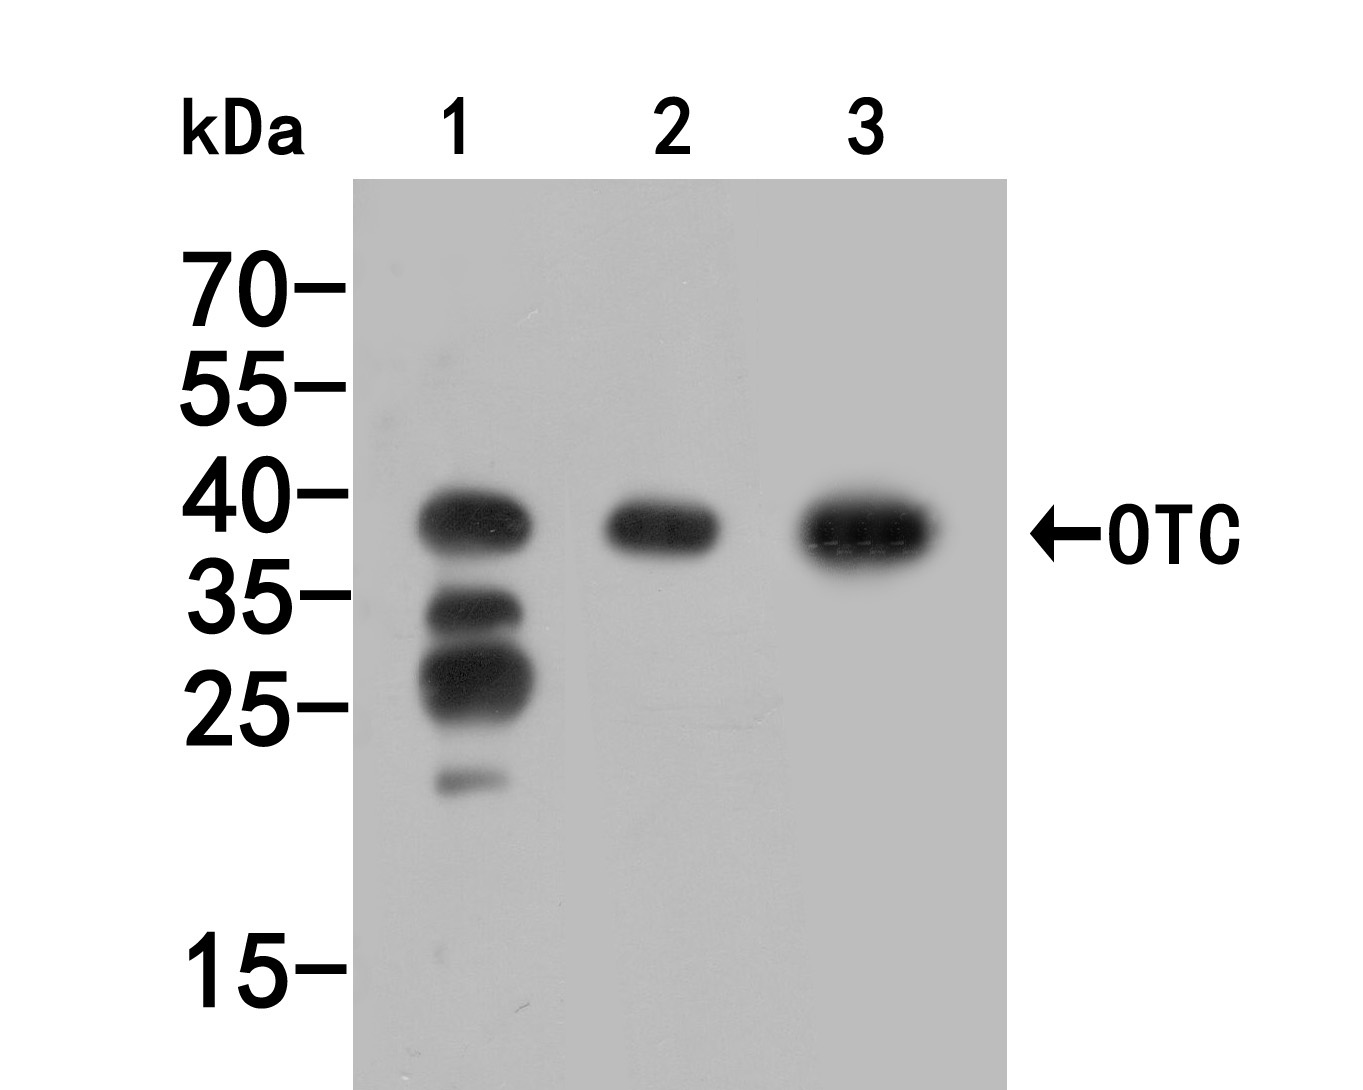 Western blot analysis of OTC/Ornithine Carbamoyltransferase on different lysates. Proteins were transferred to a PVDF membrane and blocked with 5% BSA in PBS for 1 hour at room temperature. The primary antibody (HA500048, 1/500) was used in 5% BSA at room temperature for 2 hours. Goat Anti-Rabbit IgG - HRP Secondary Antibody (HA1001) at 1:5,000 dilution was used for 1 hour at room temperature.<br />
Positive control: <br />
Lane 1: Rat colon tissue lysate<br />
Lane 2: Human liver tissue lysate<br />
Lane 2: Mouse liver tissue lysate